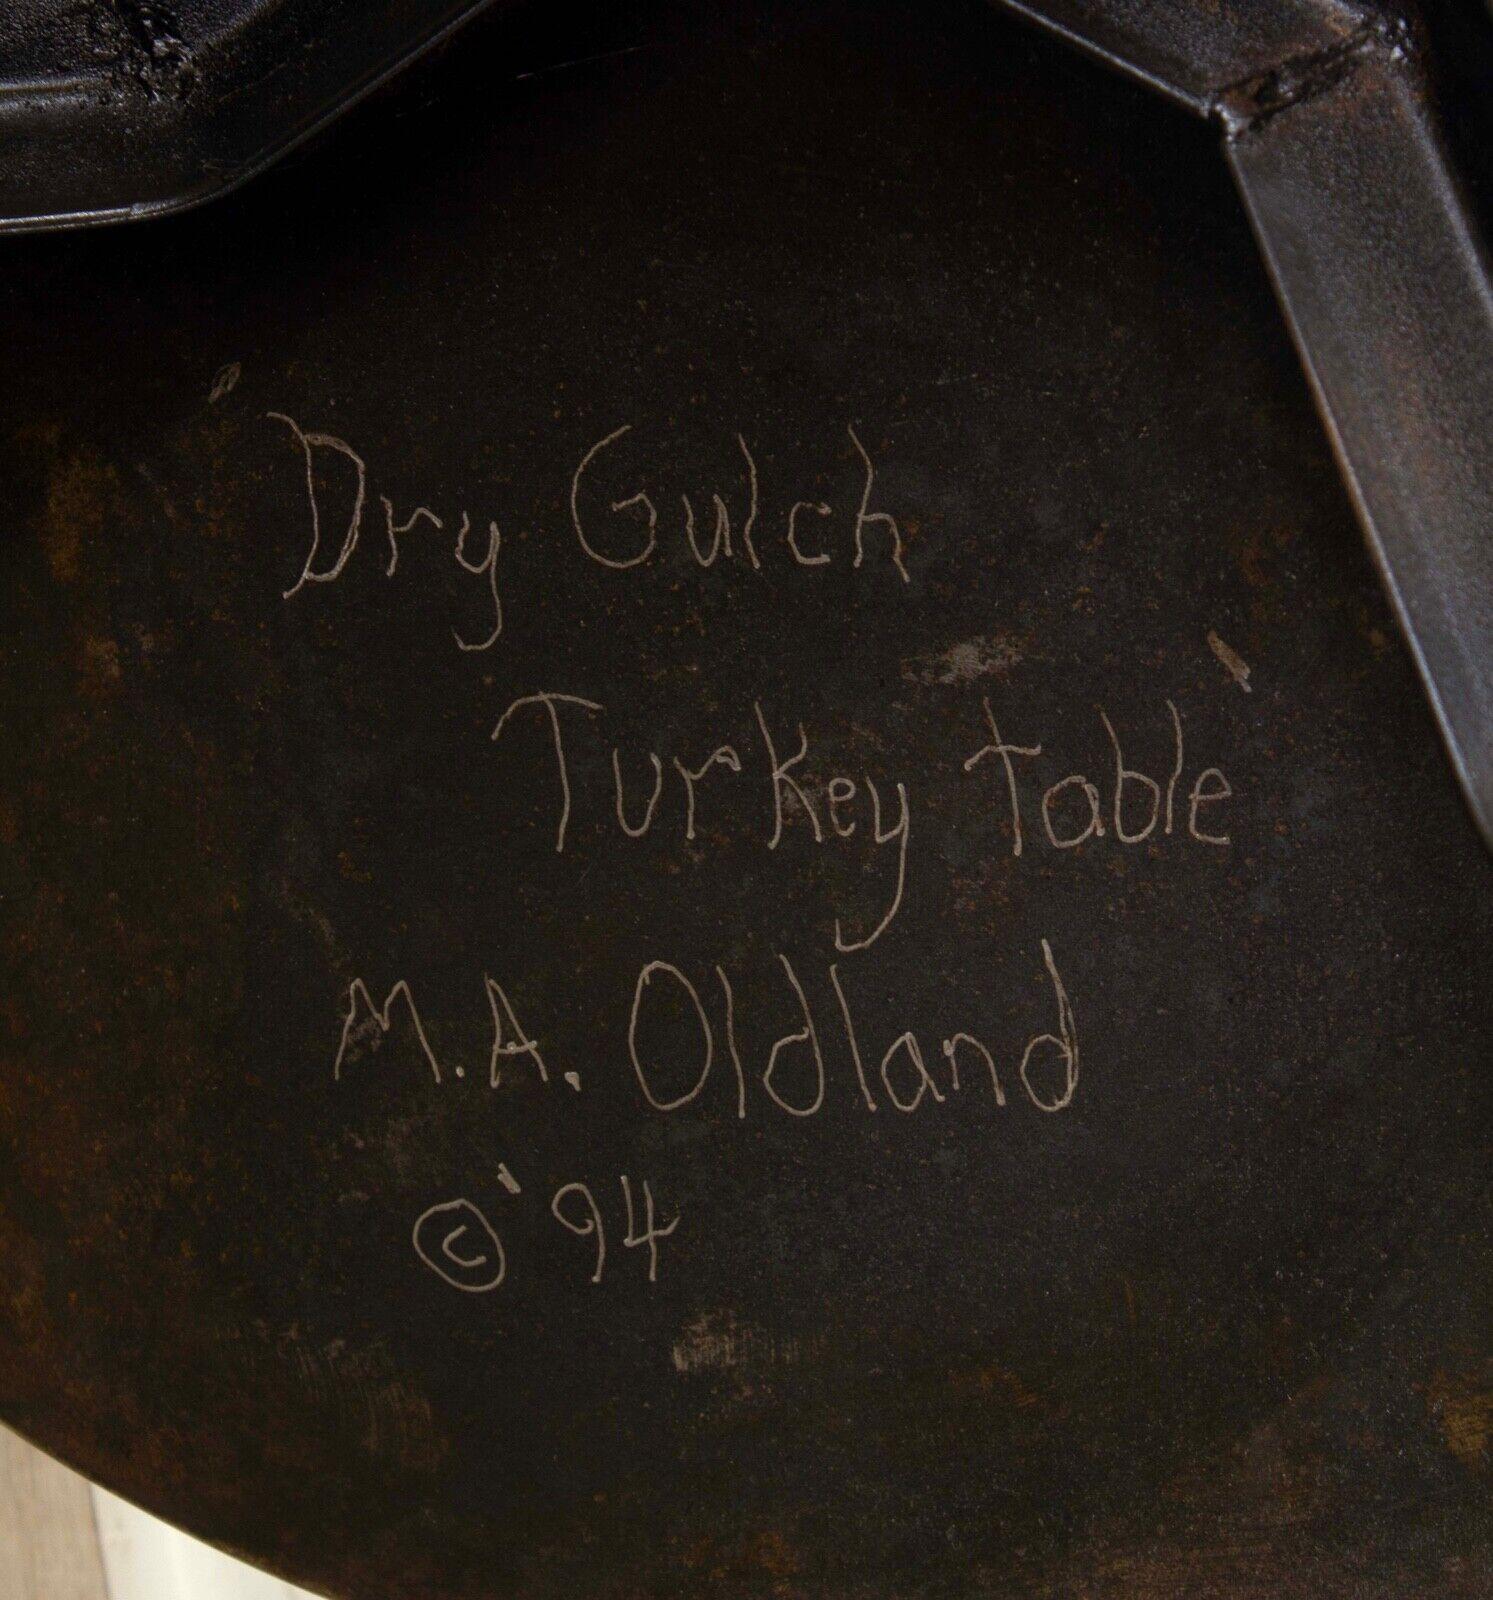 Mark Oldland Dry Gulch Turkey Signed Contemporary Studio Art Sculptural Table For Sale 5